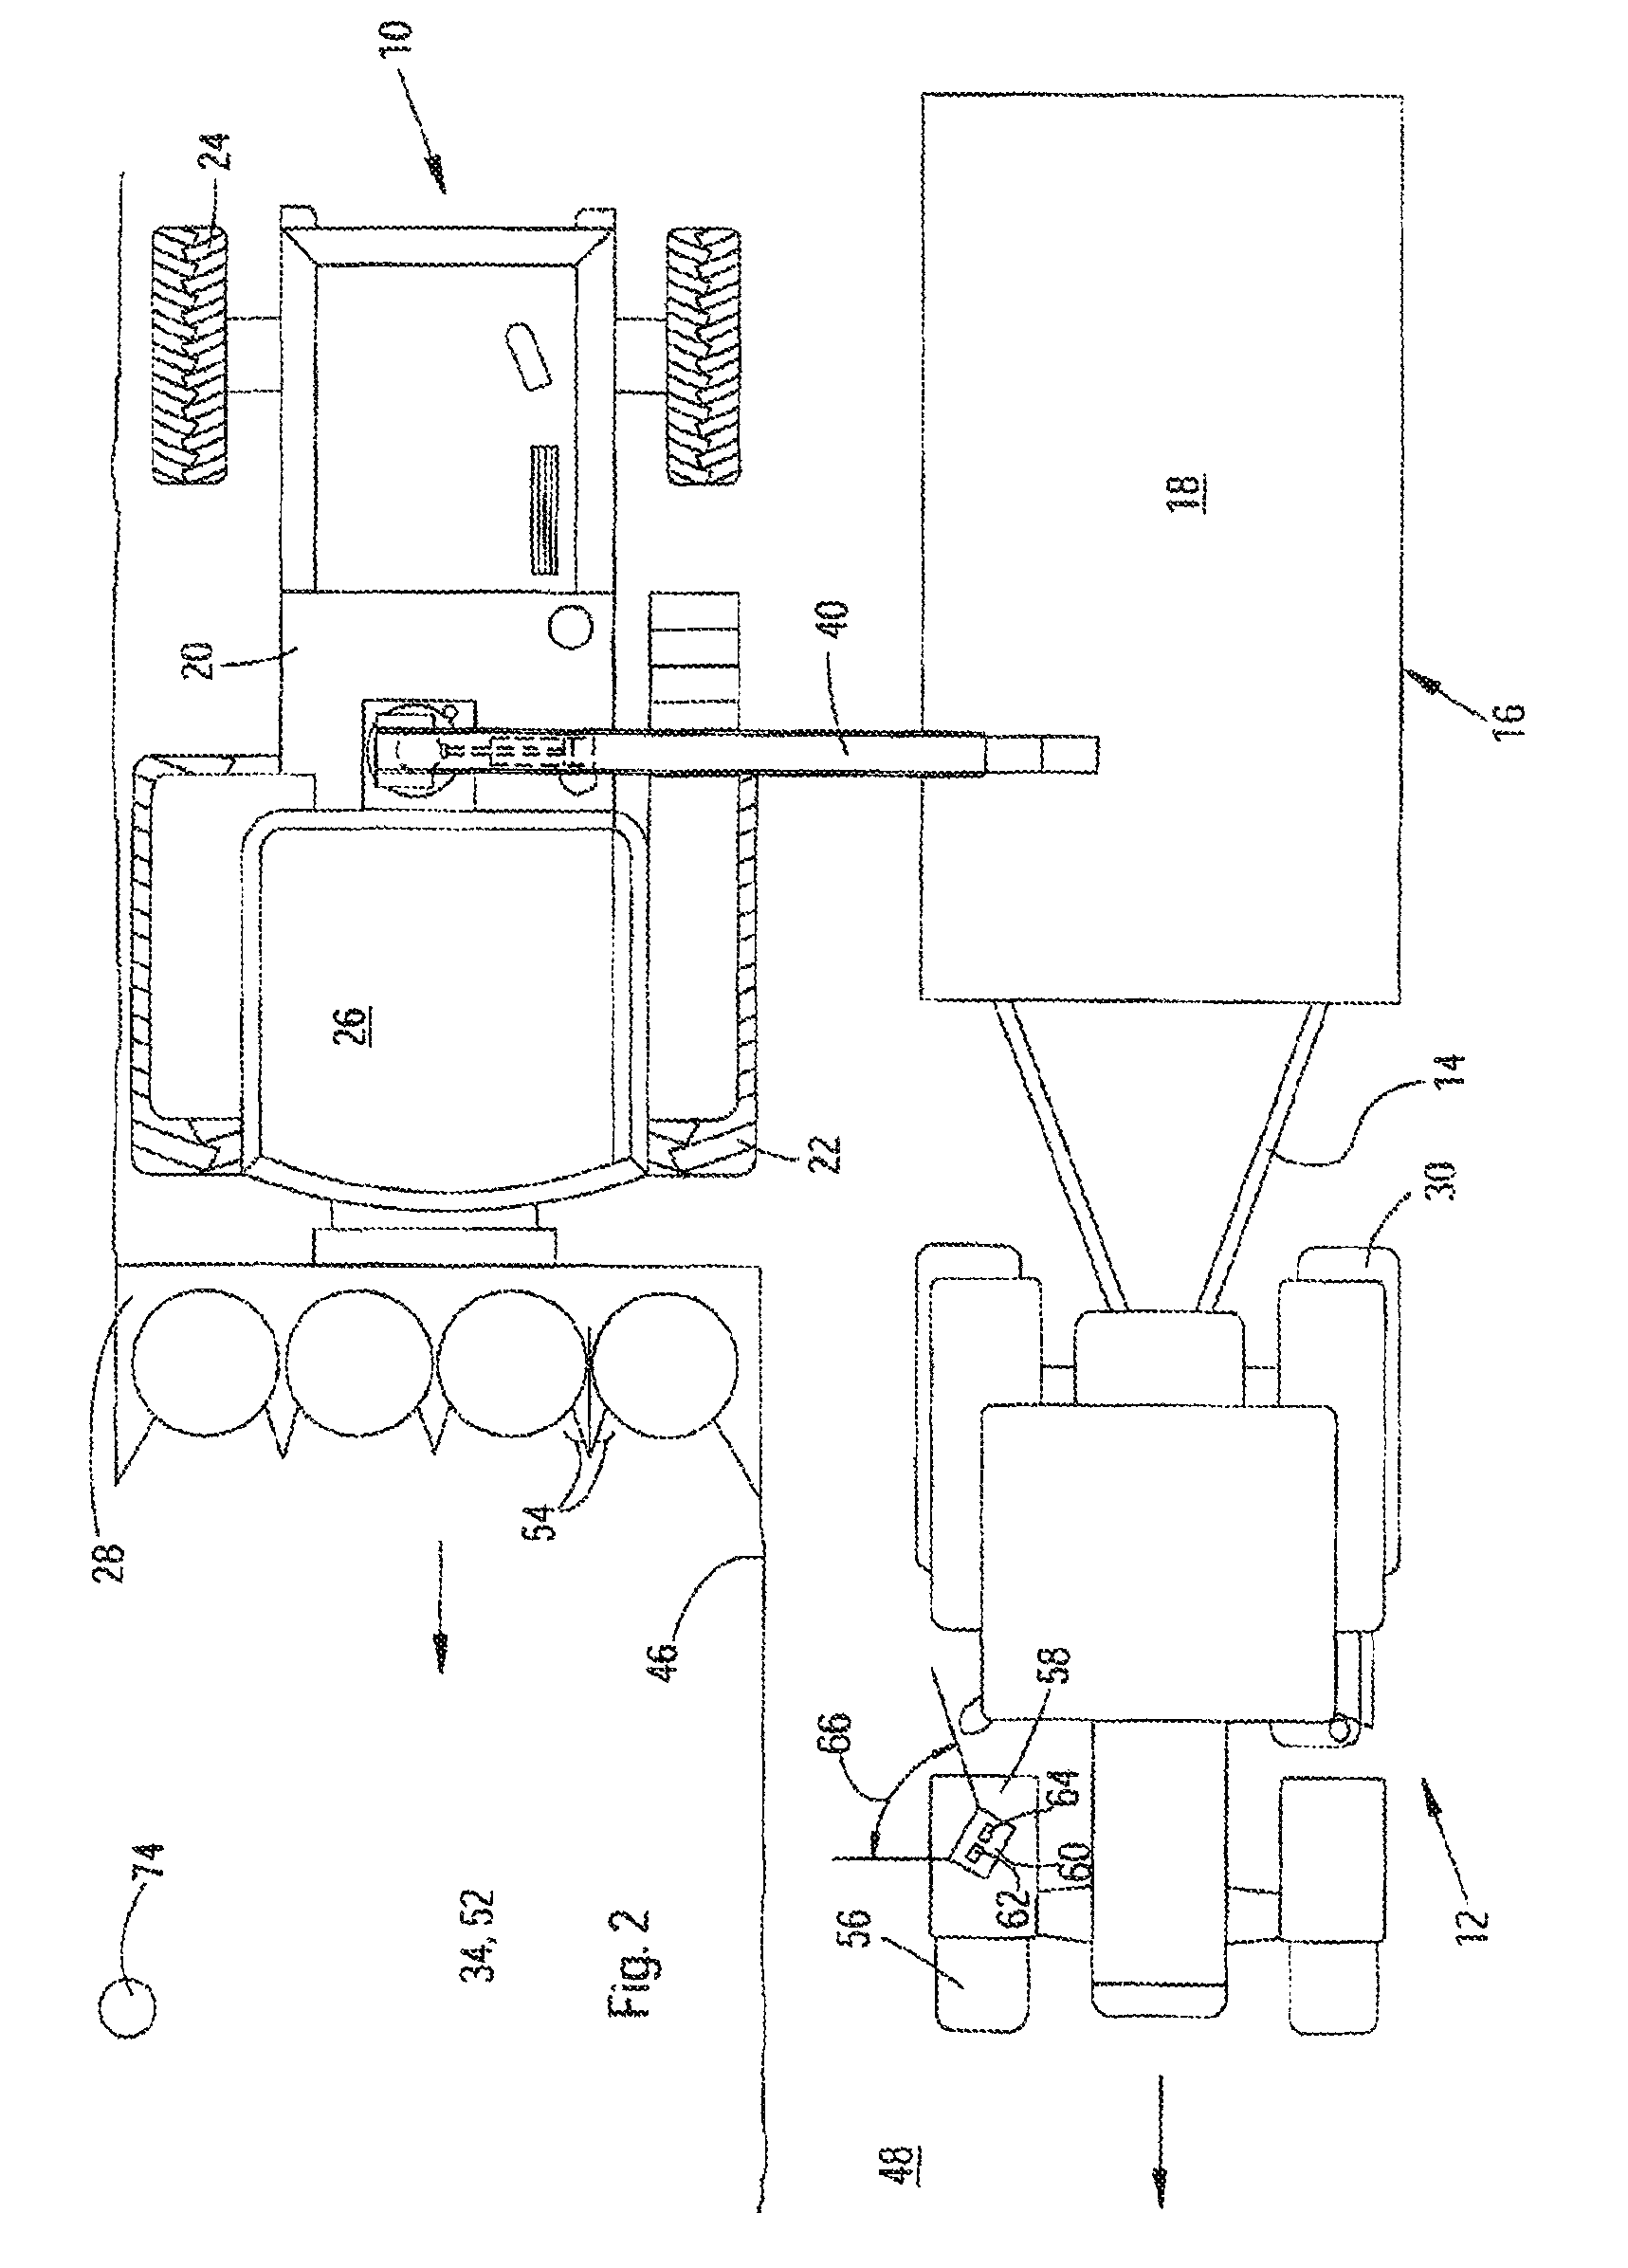 Method and device for steering a second agricultural machine, which can be steered to drive over a field parallel to a first agricultural machine